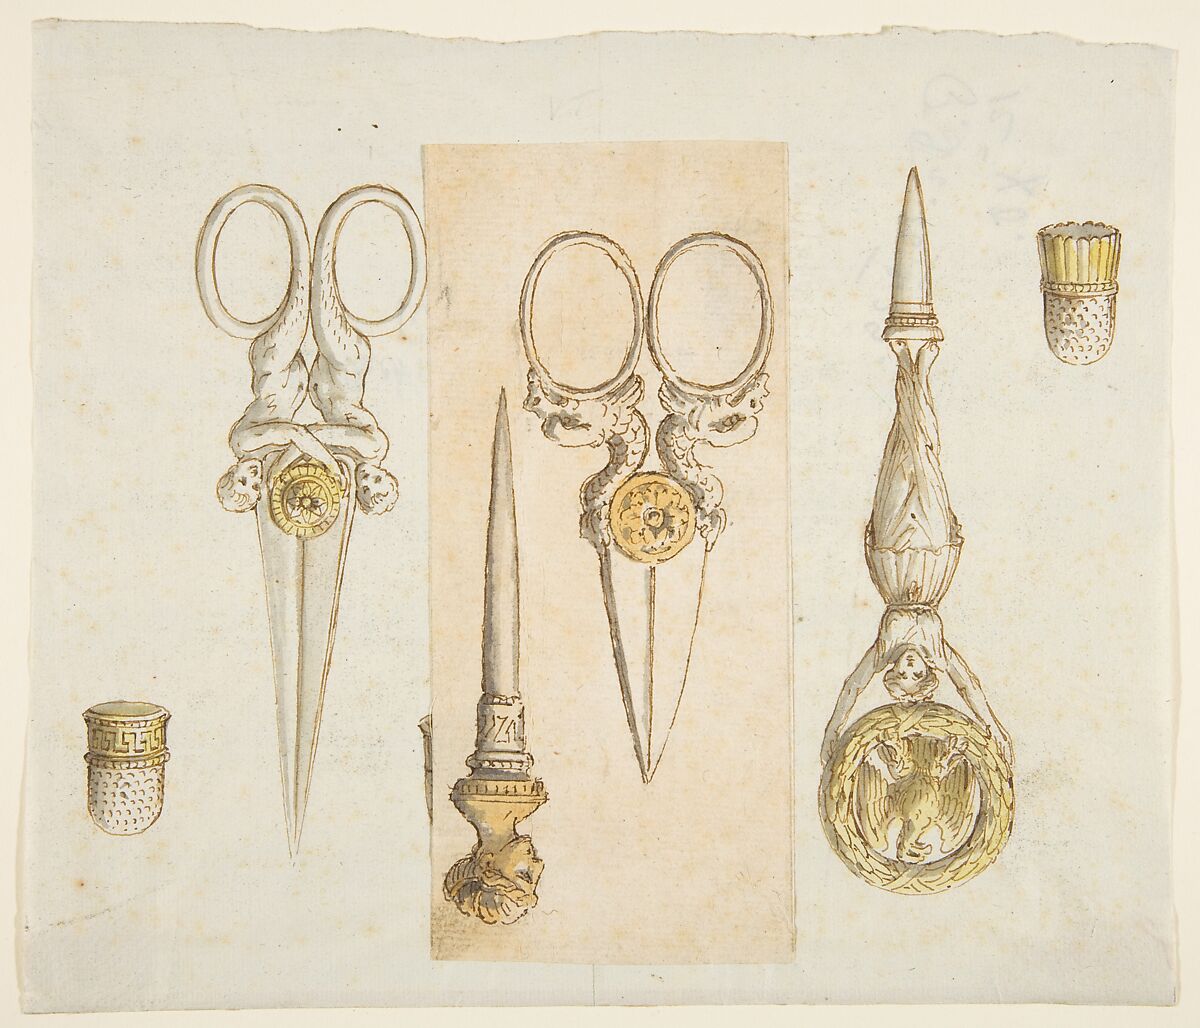 Designs for Scissors, Punches, and Thimbles, Anonymous, French, 19th century, Pen and brown ink with gray and yellow wash 